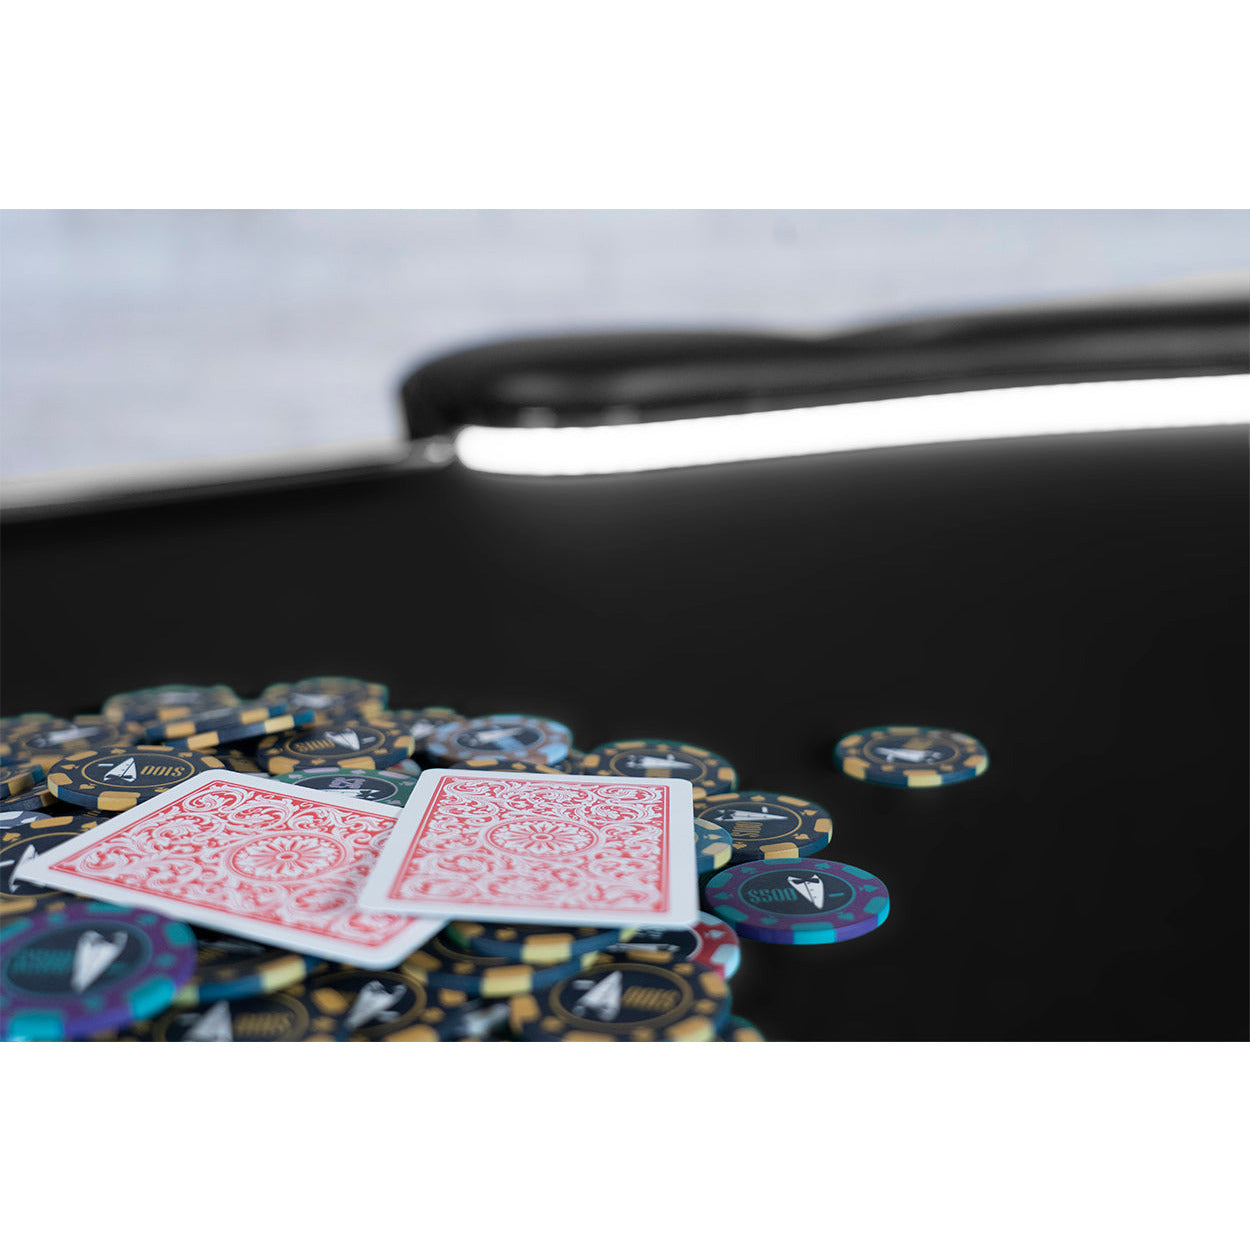 BBO The Aces Pro Alpha Folding Poker Table black close up of cards and chips 